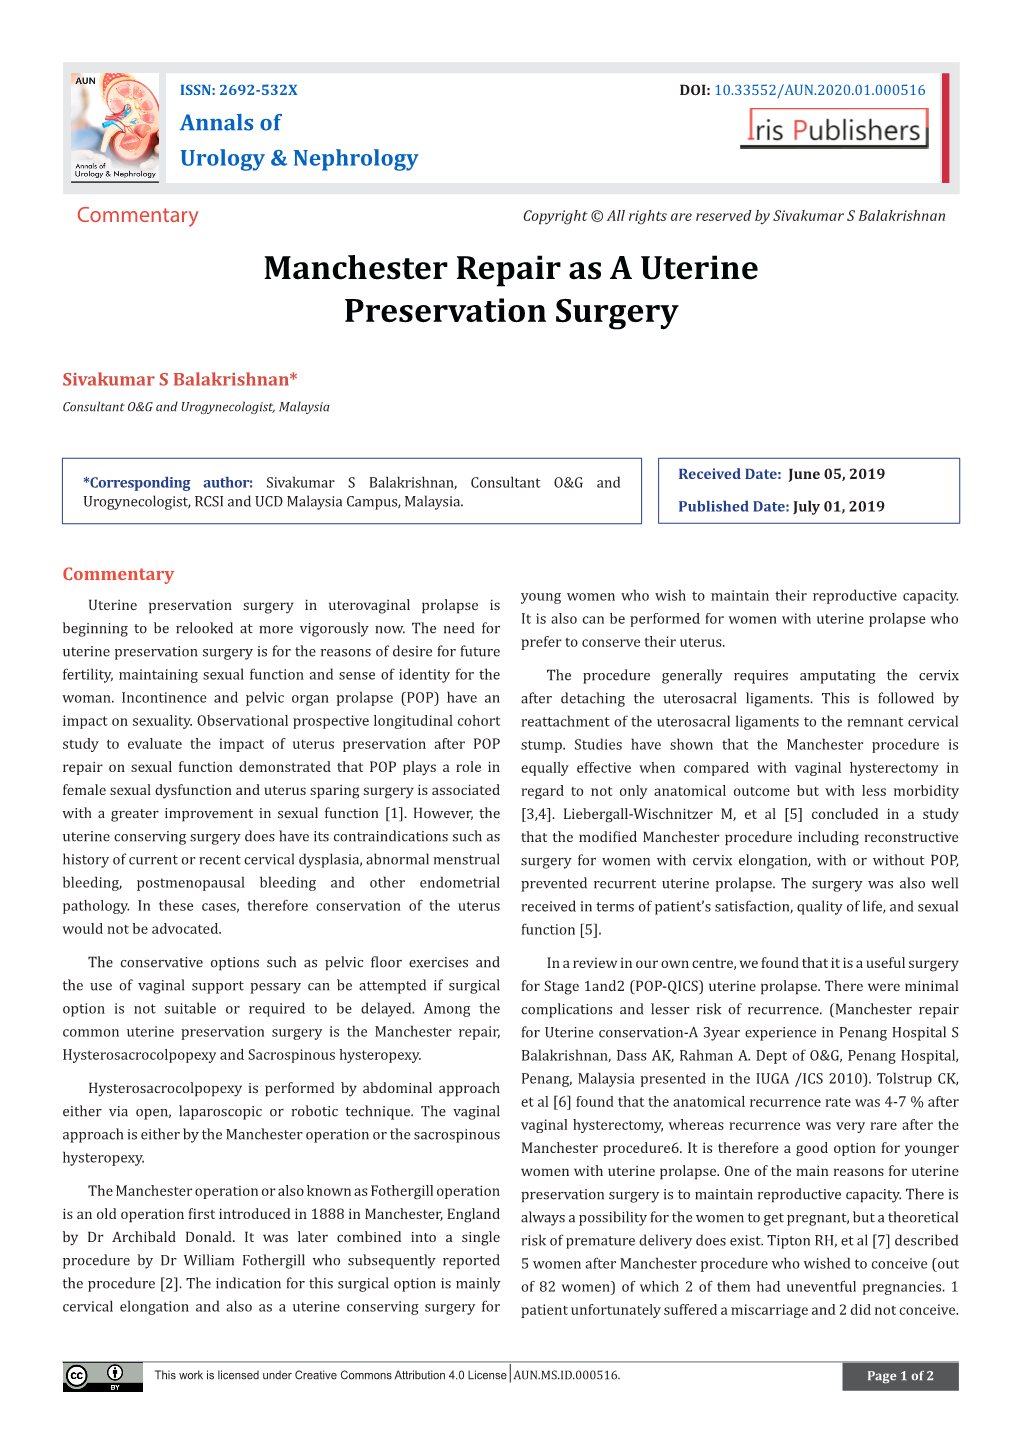 Manchester Repair As a Uterine Preservation Surgery